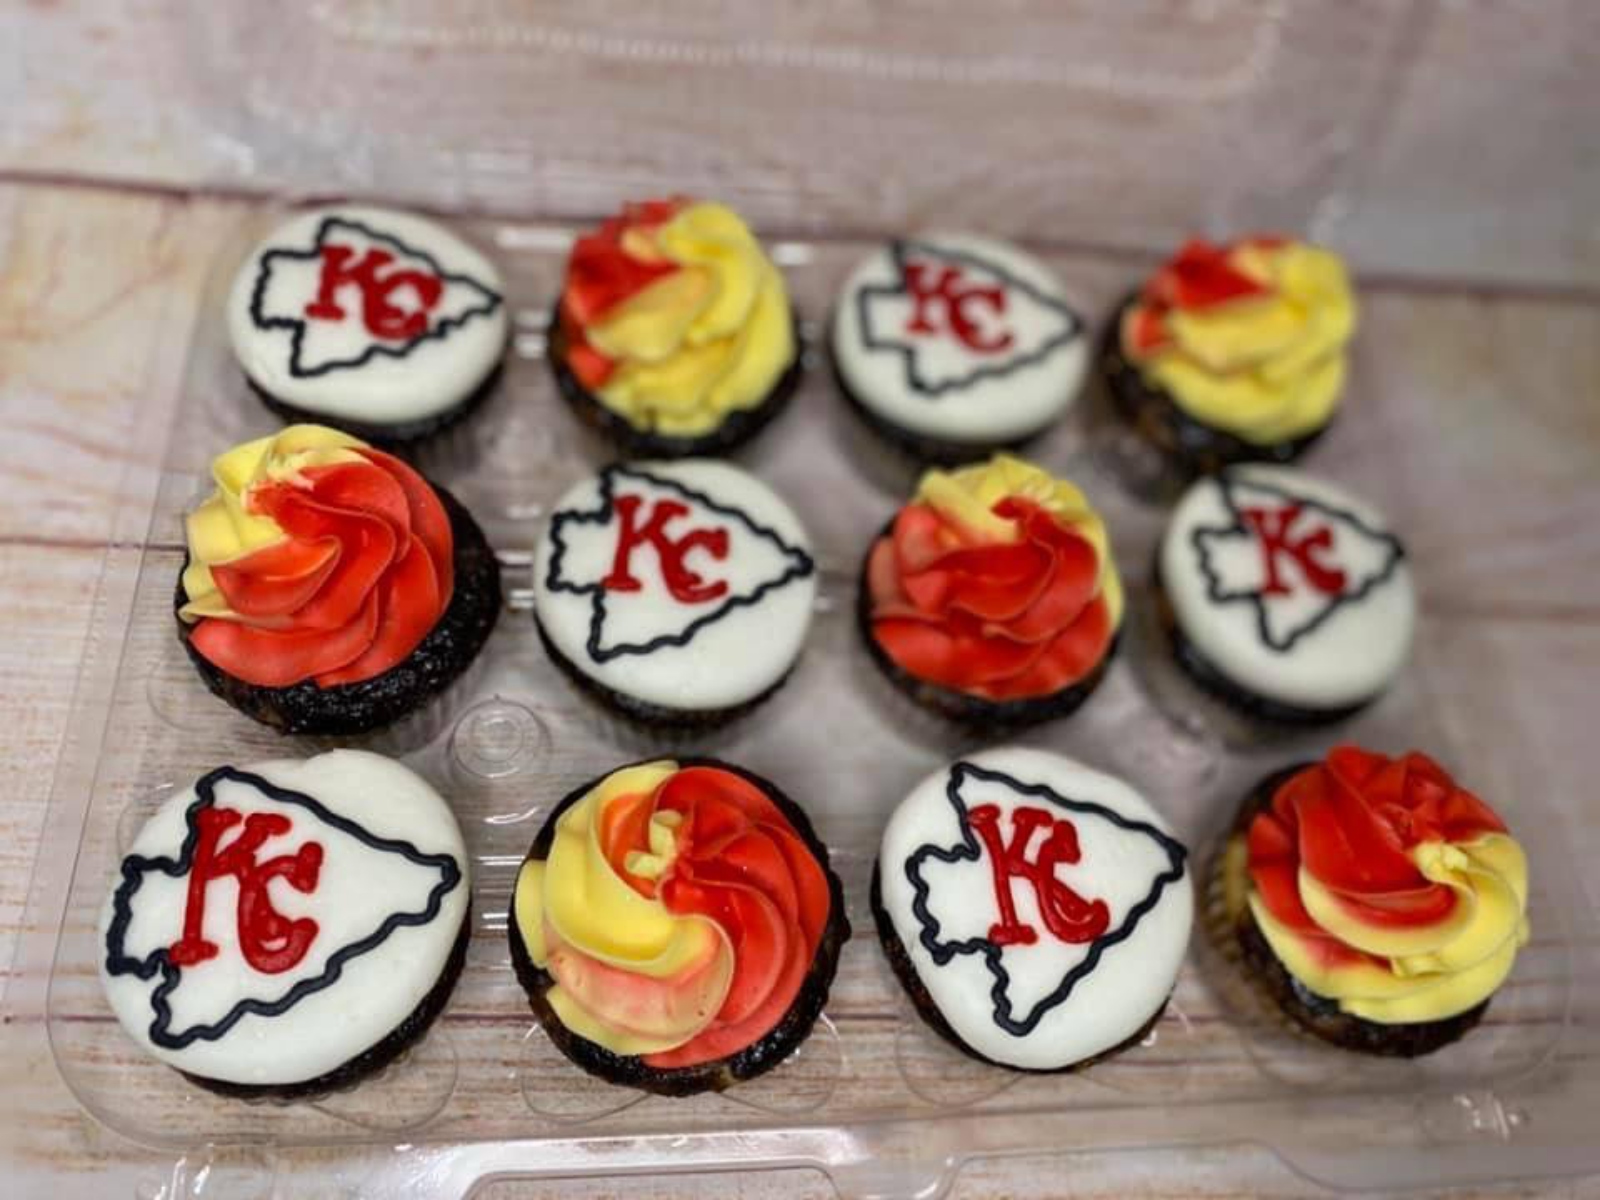 A tray of cupcakes decorated with Kansas City Chiefs logos and red and yellow frosting.